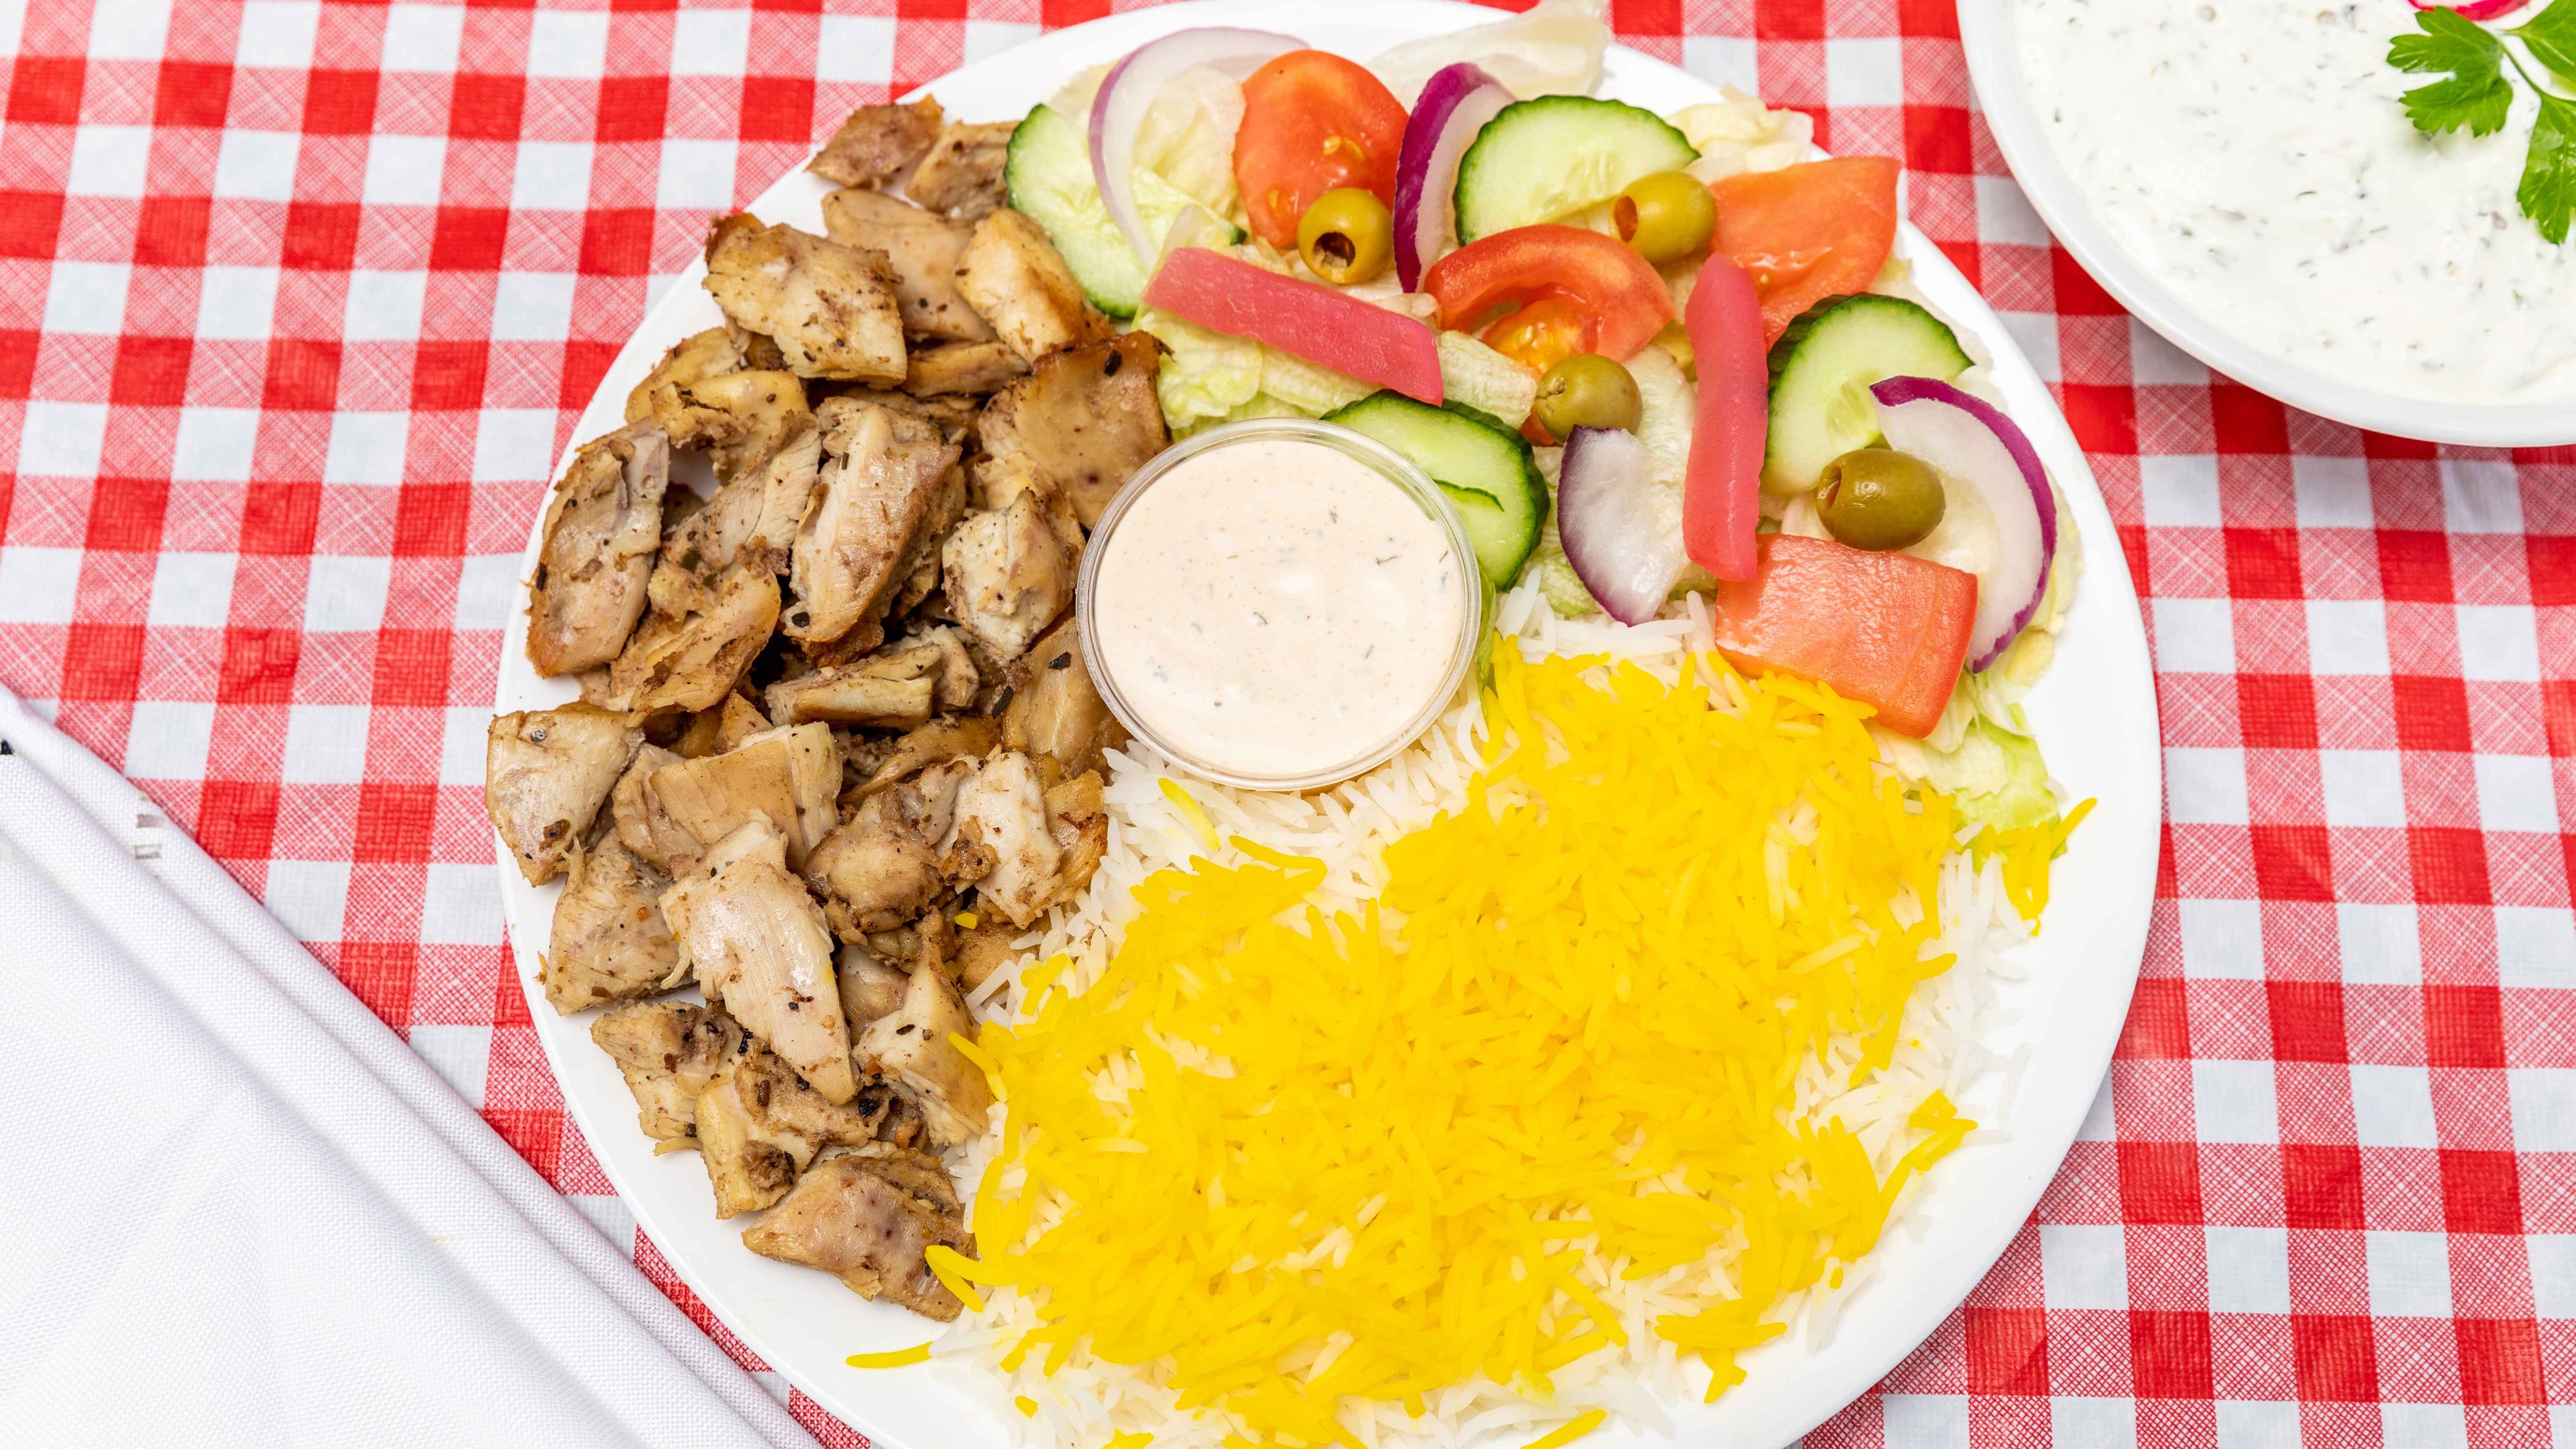 shawarma place with rice and salad